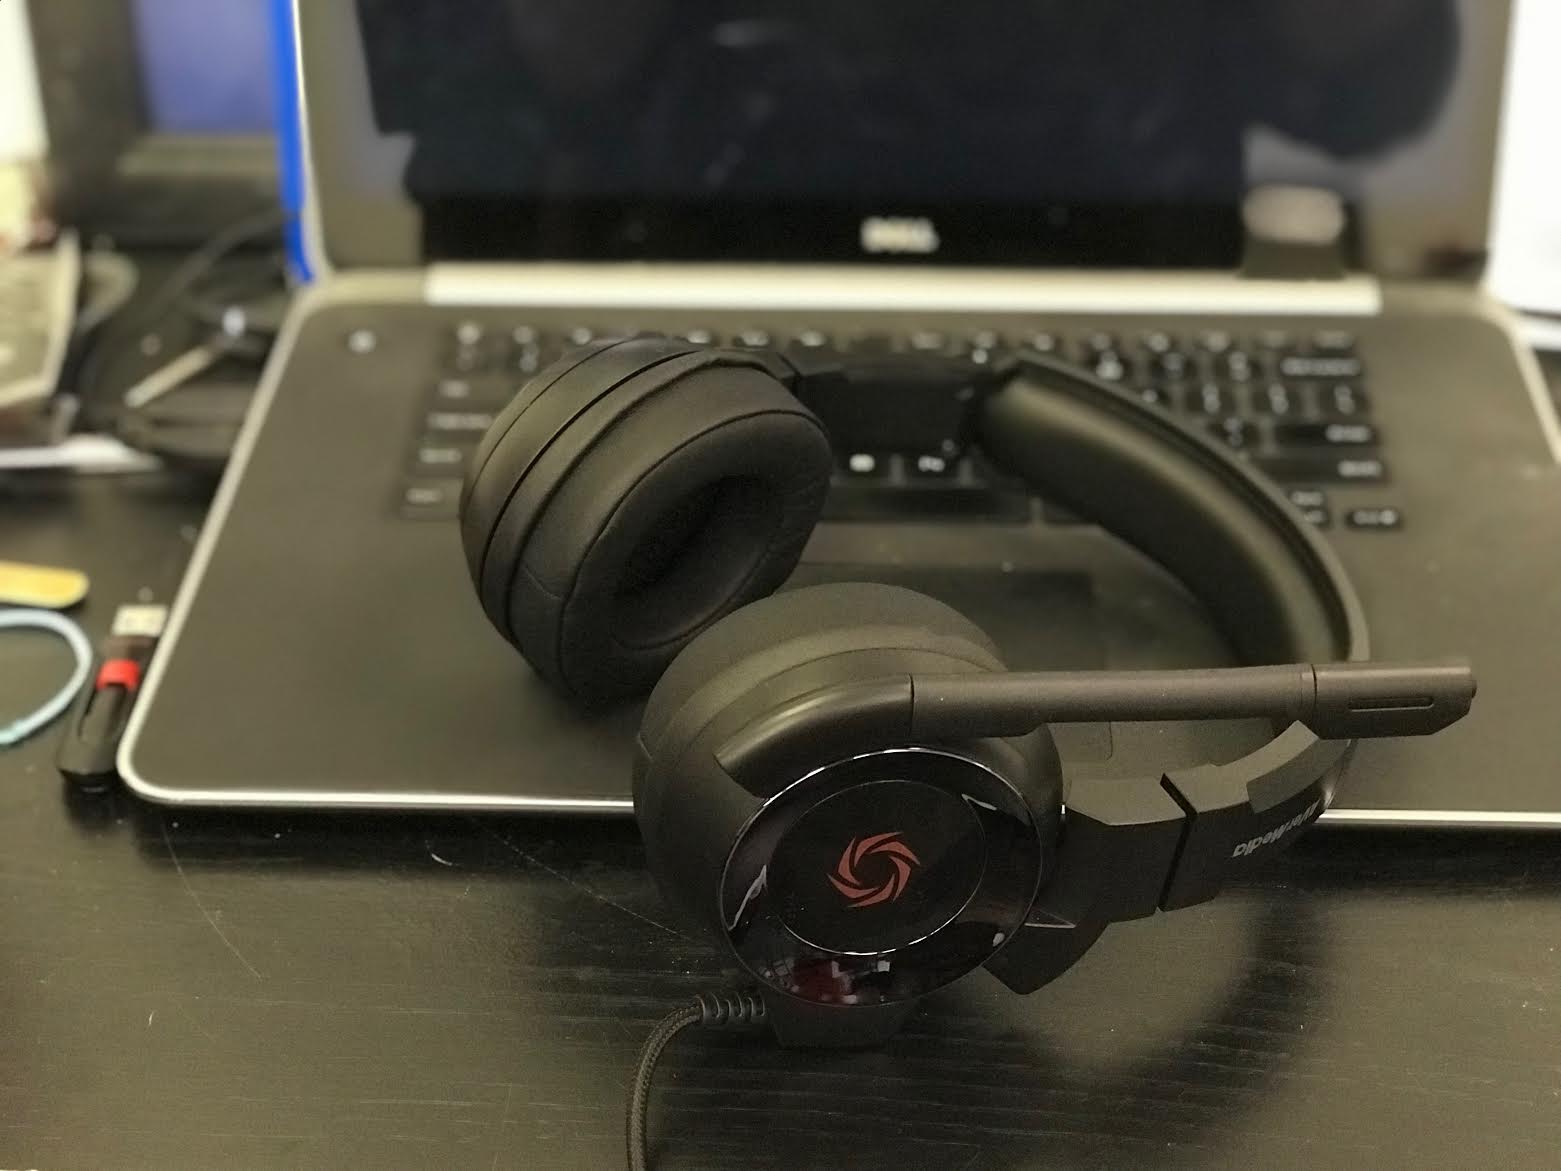 AVerMedia SonicWave GH335 Headset Review